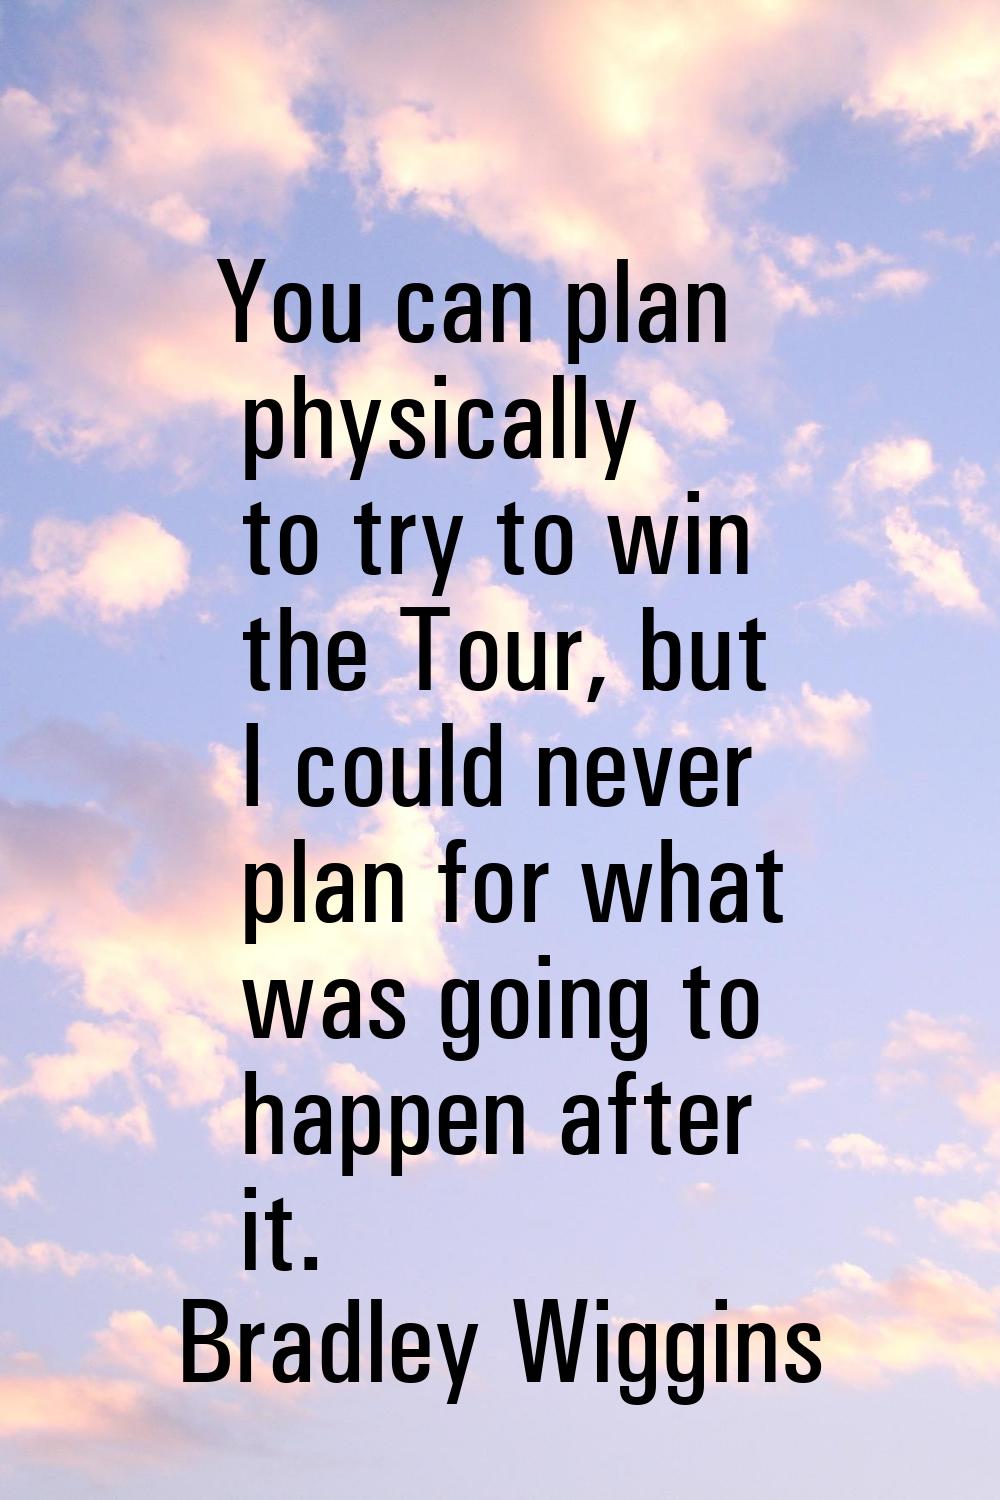 You can plan physically to try to win the Tour, but I could never plan for what was going to happen